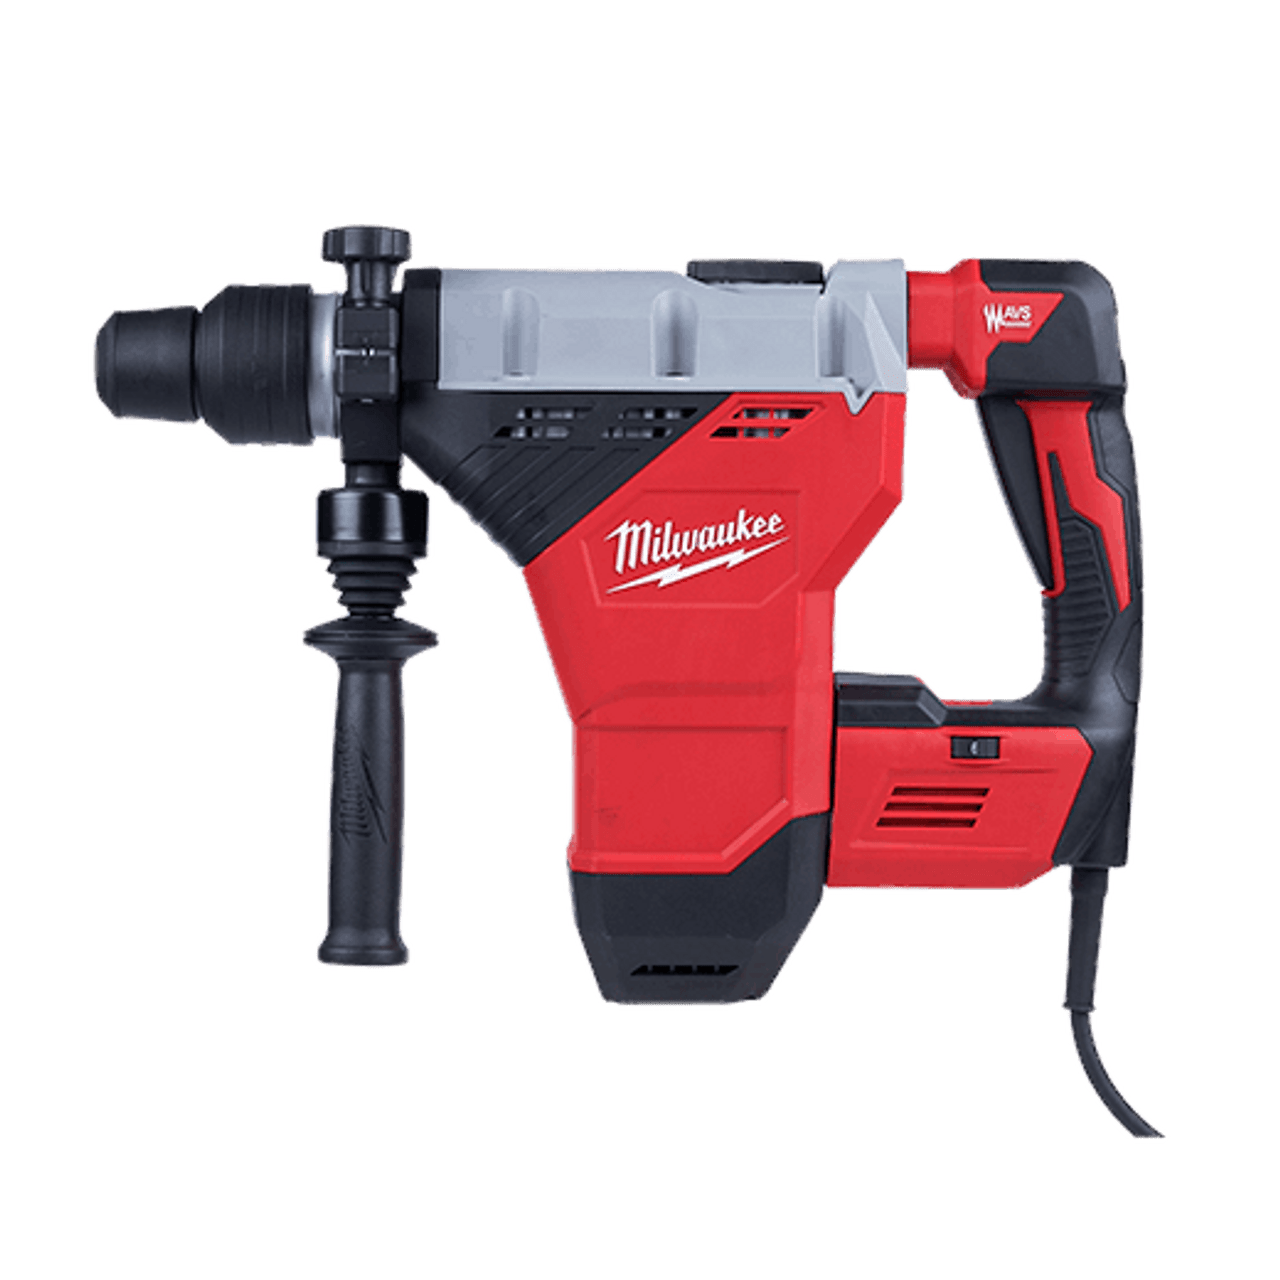 1-3/4 in. SDS-Max Rotary Hammer